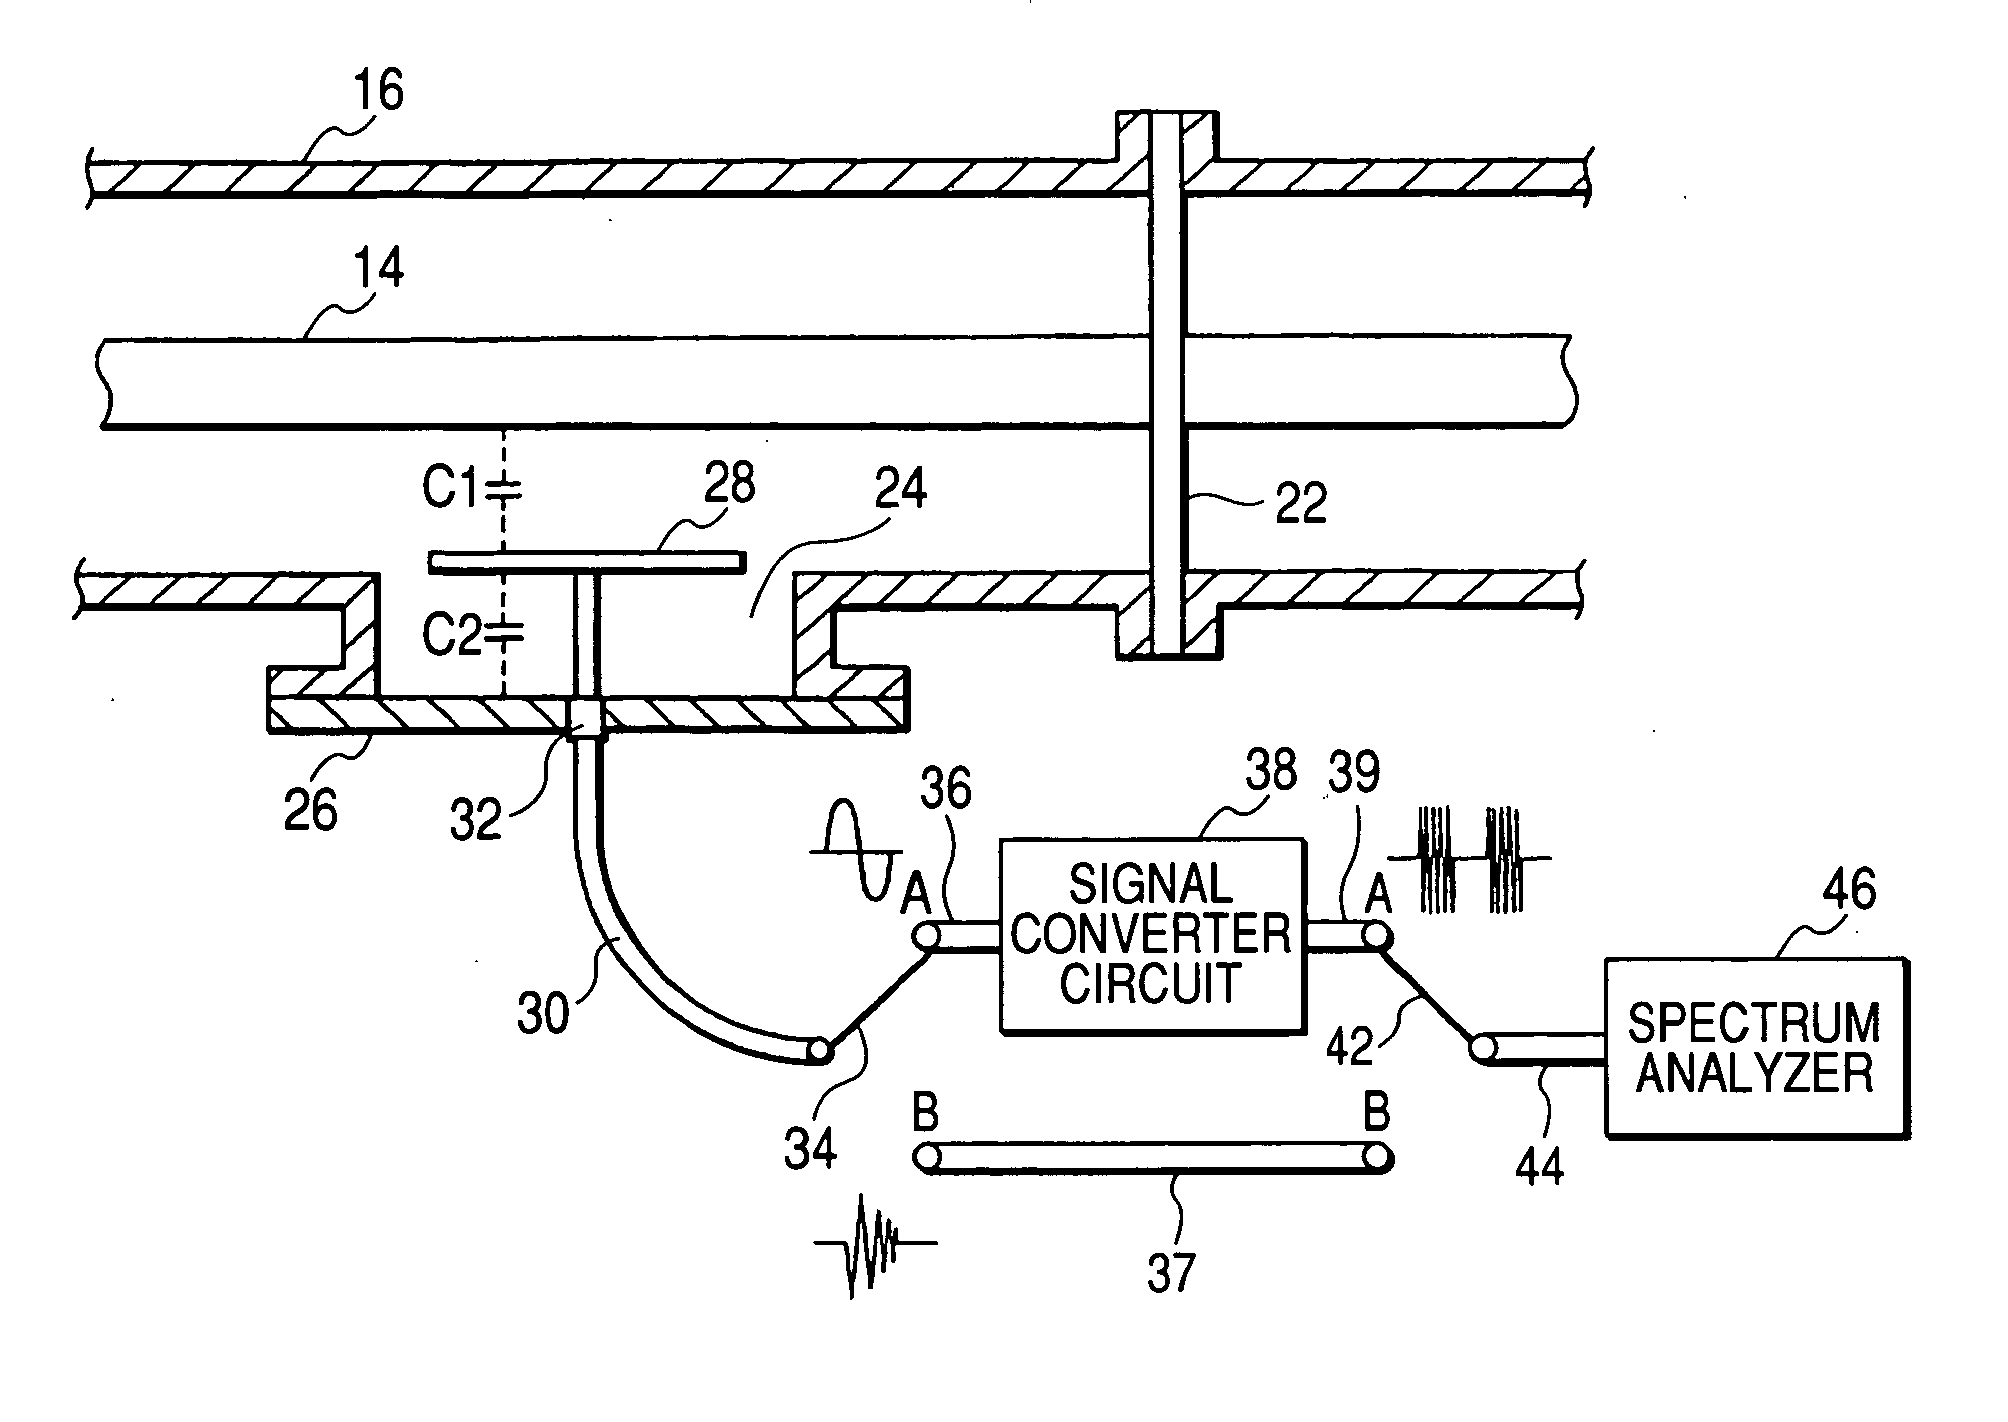 Method and system for measuring partial discharge